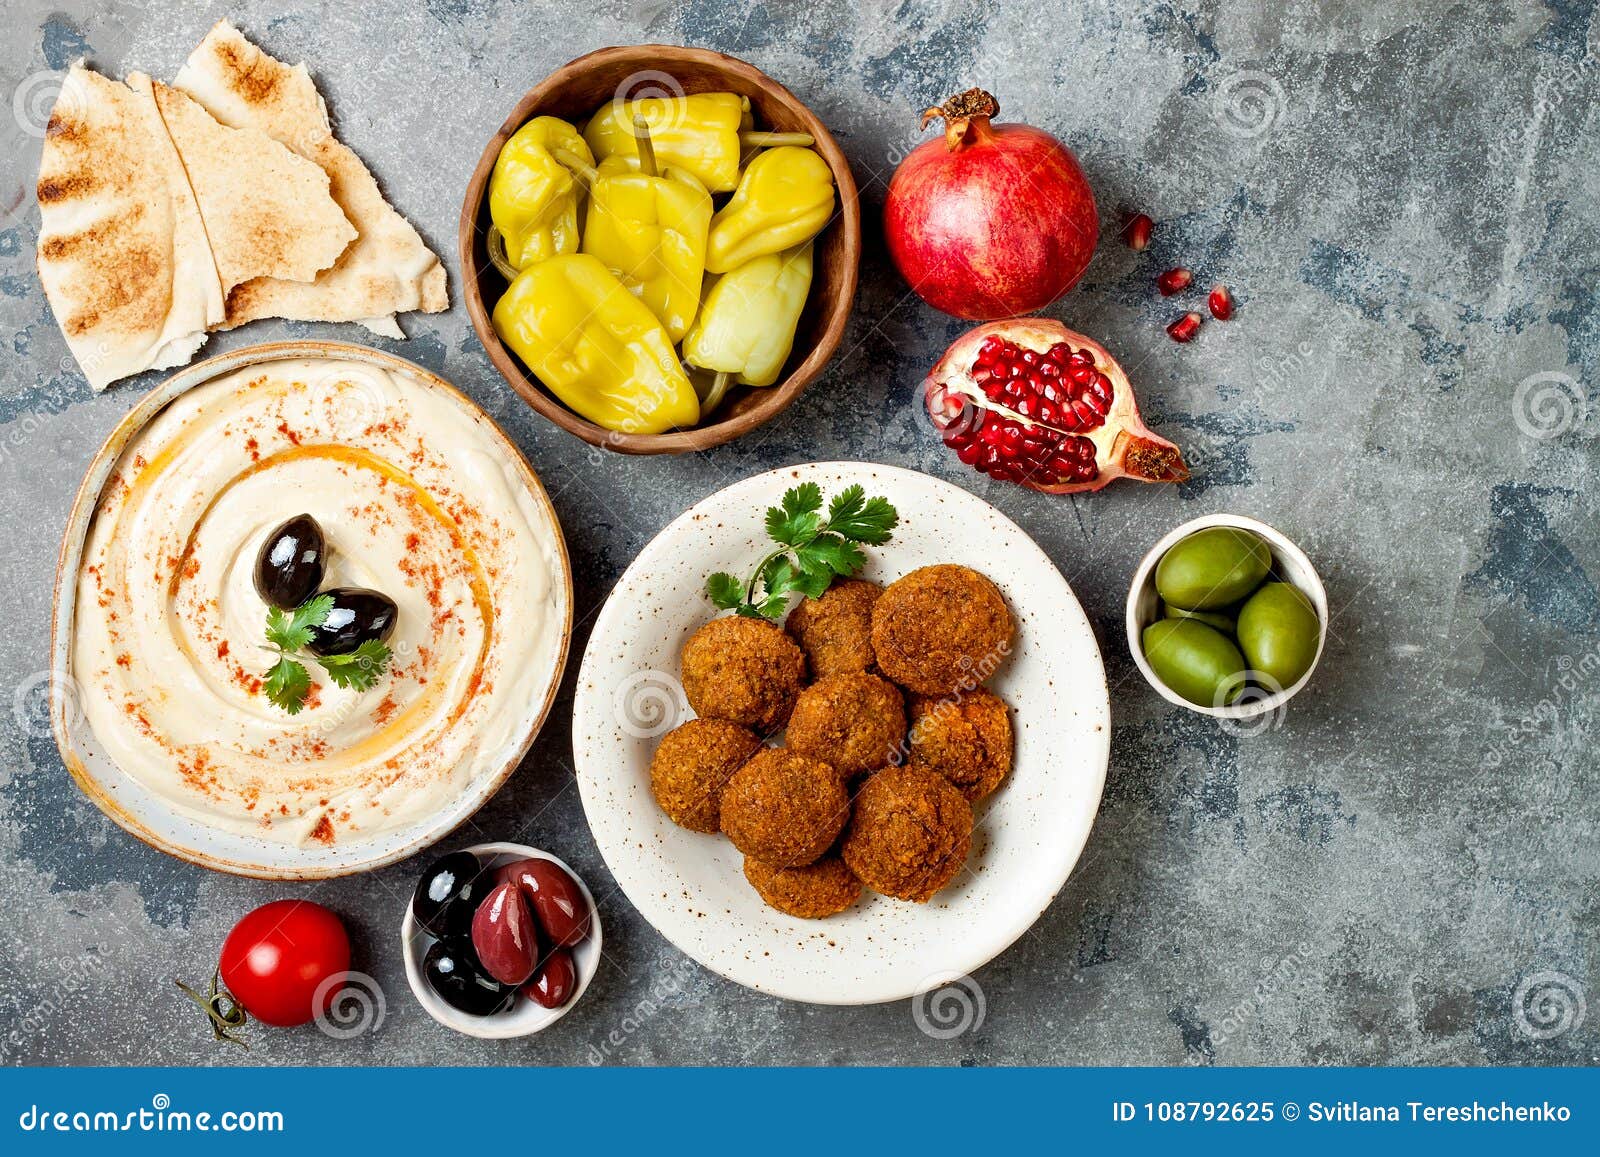 middle eastern traditional dinner. authentic arab cuisine. meze party food. top view, flat lay, overhead.